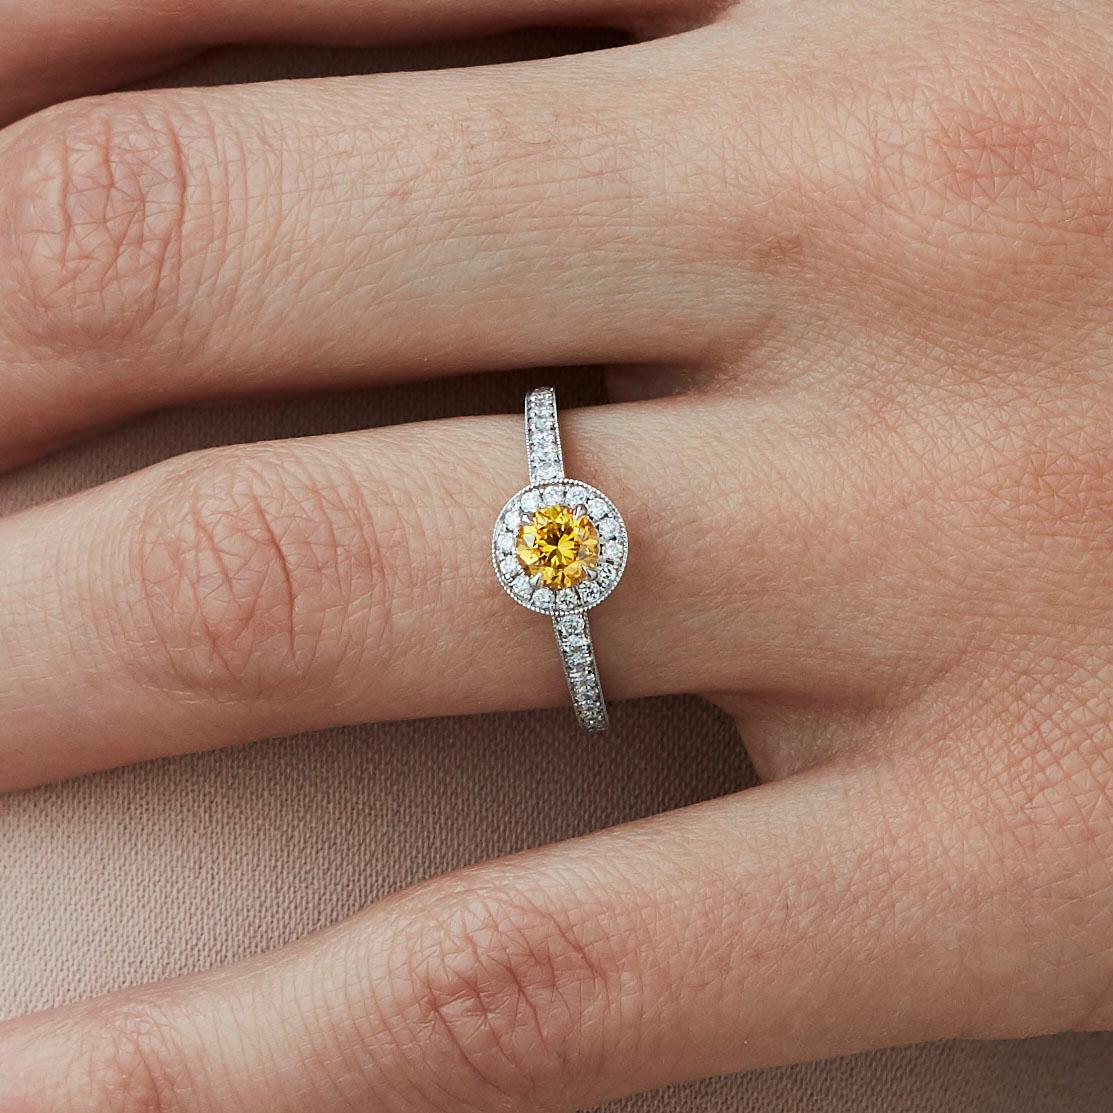 A House of Garrard platinum ring from the 'Garrard Evermore' collection, set with round white diamonds and a central round yellow diamond.

1 round yellow diamond weighing: 0.43cts
GIA certified, Fancy Vivid Yellow
36 round white diamonds weighing: